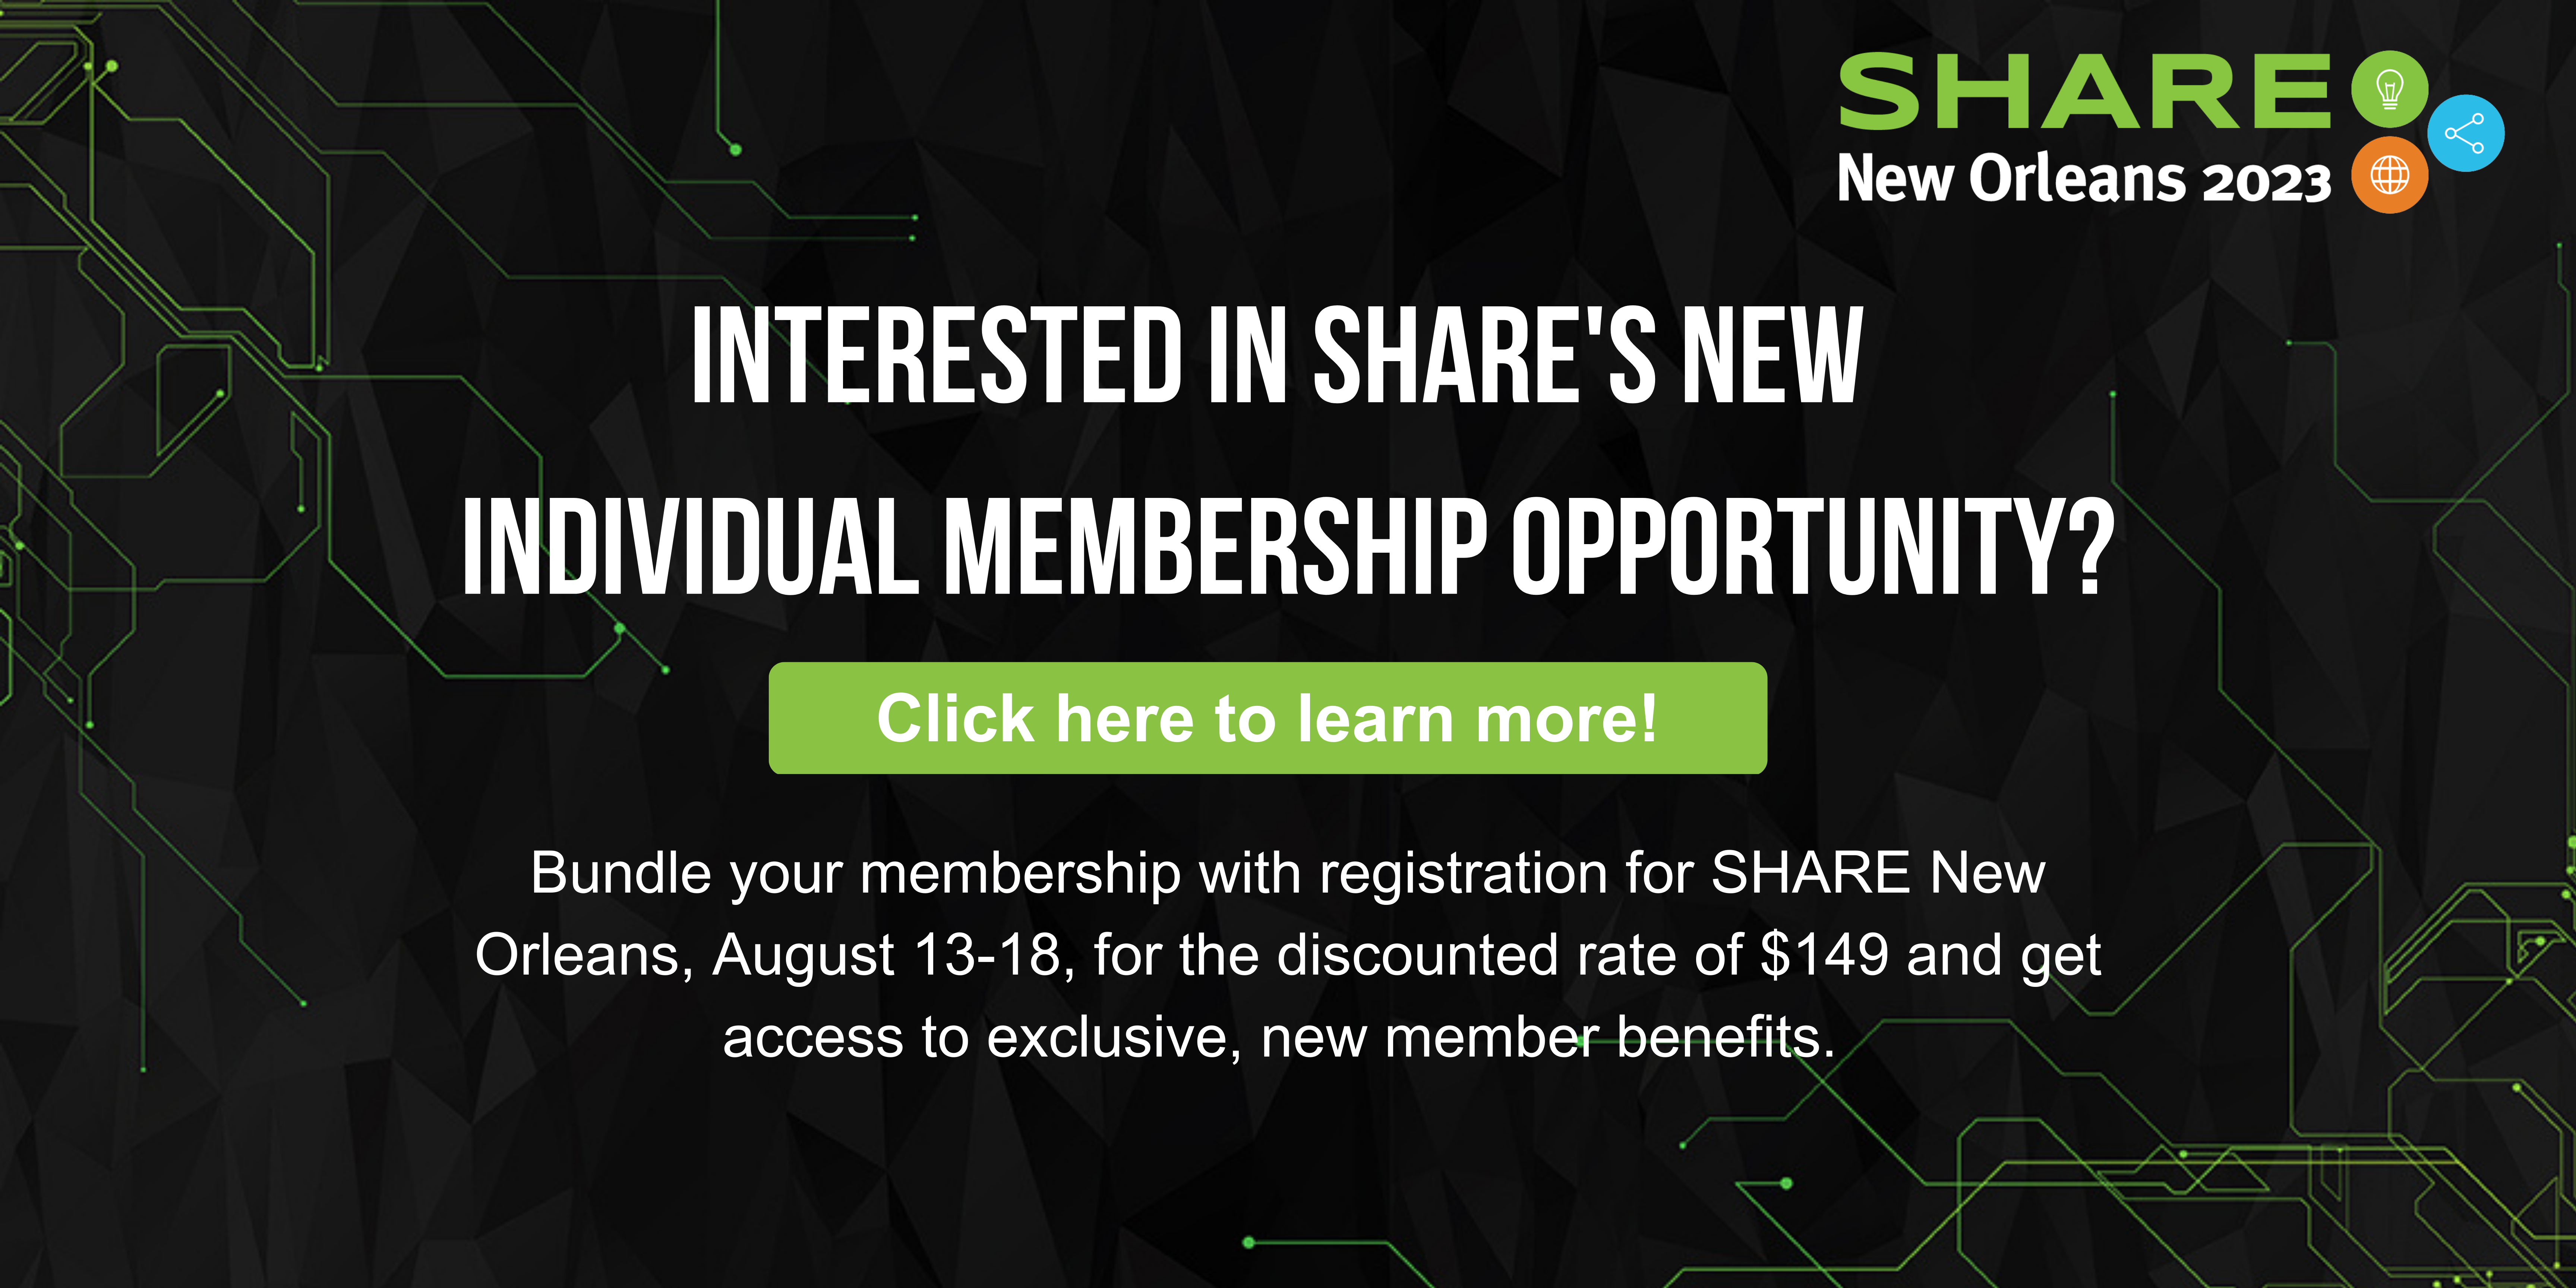 Interested in SHARE's new individual membership opportunity? Click to learn more. Bundle your membership with registration for SHARE New Orleans, August 13-18, for the discounted rate of $149 and get access to exclusive, new member benefits. 